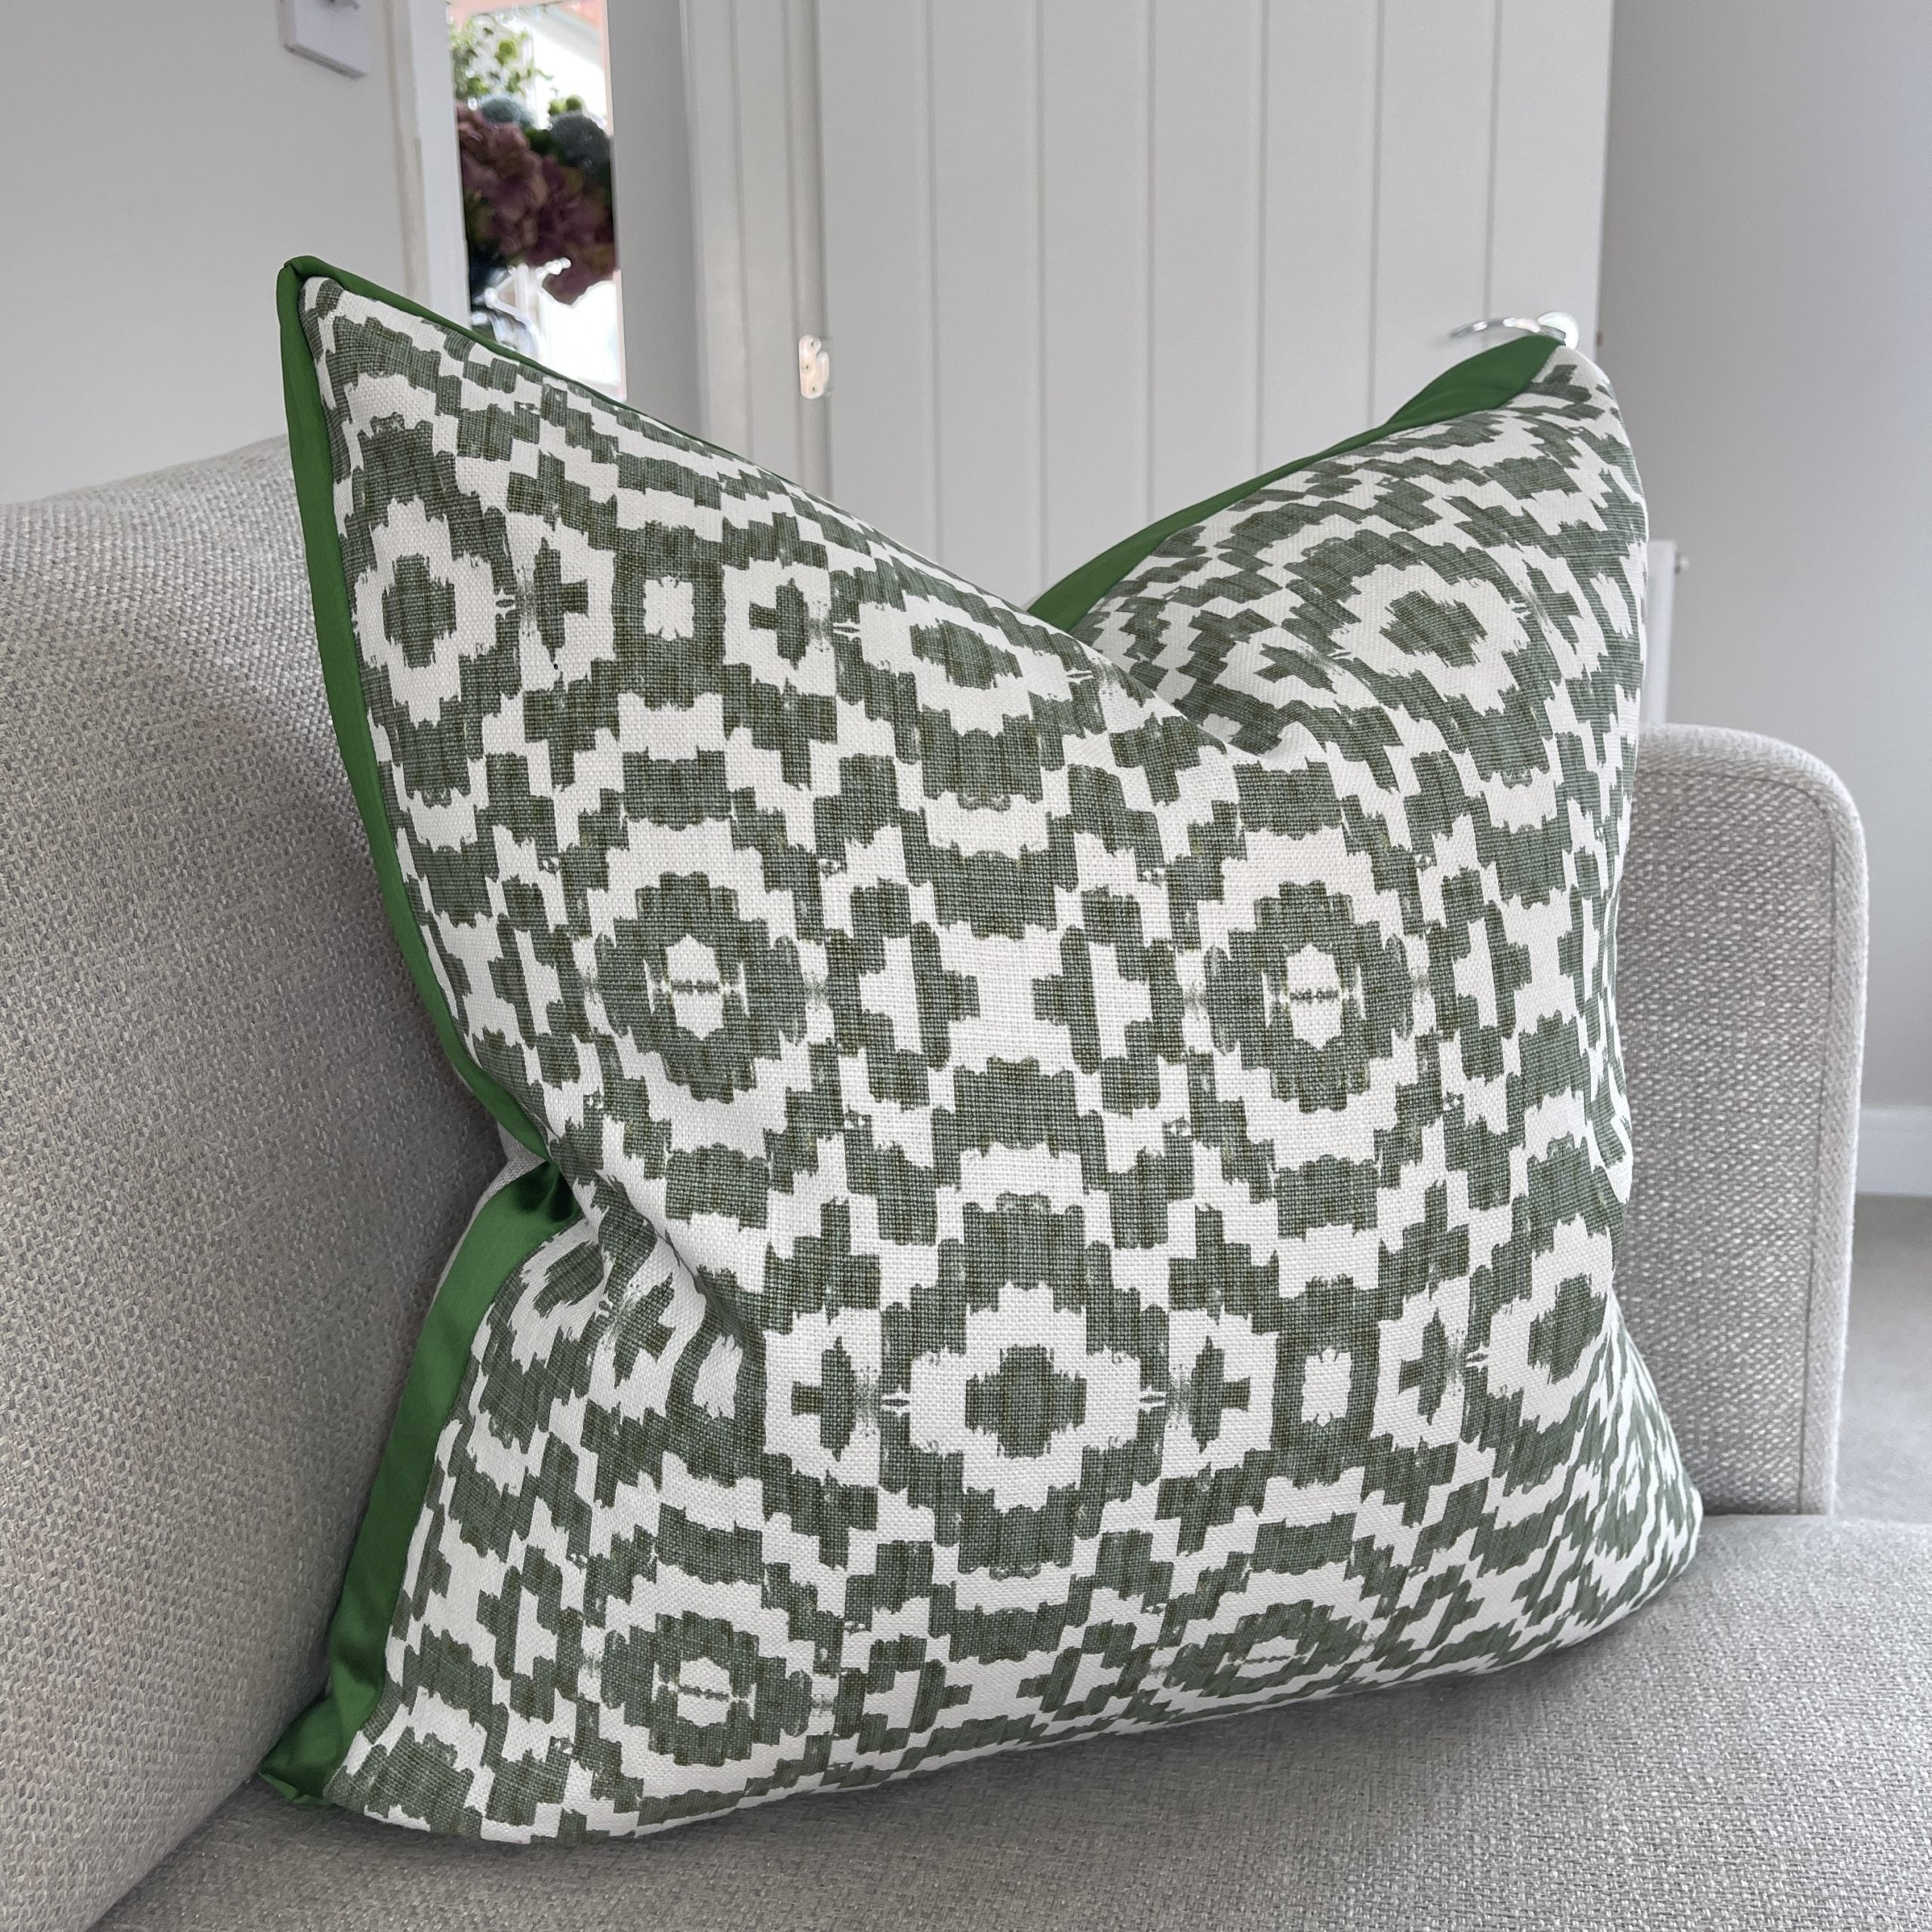 Bespoke cushion on a couch